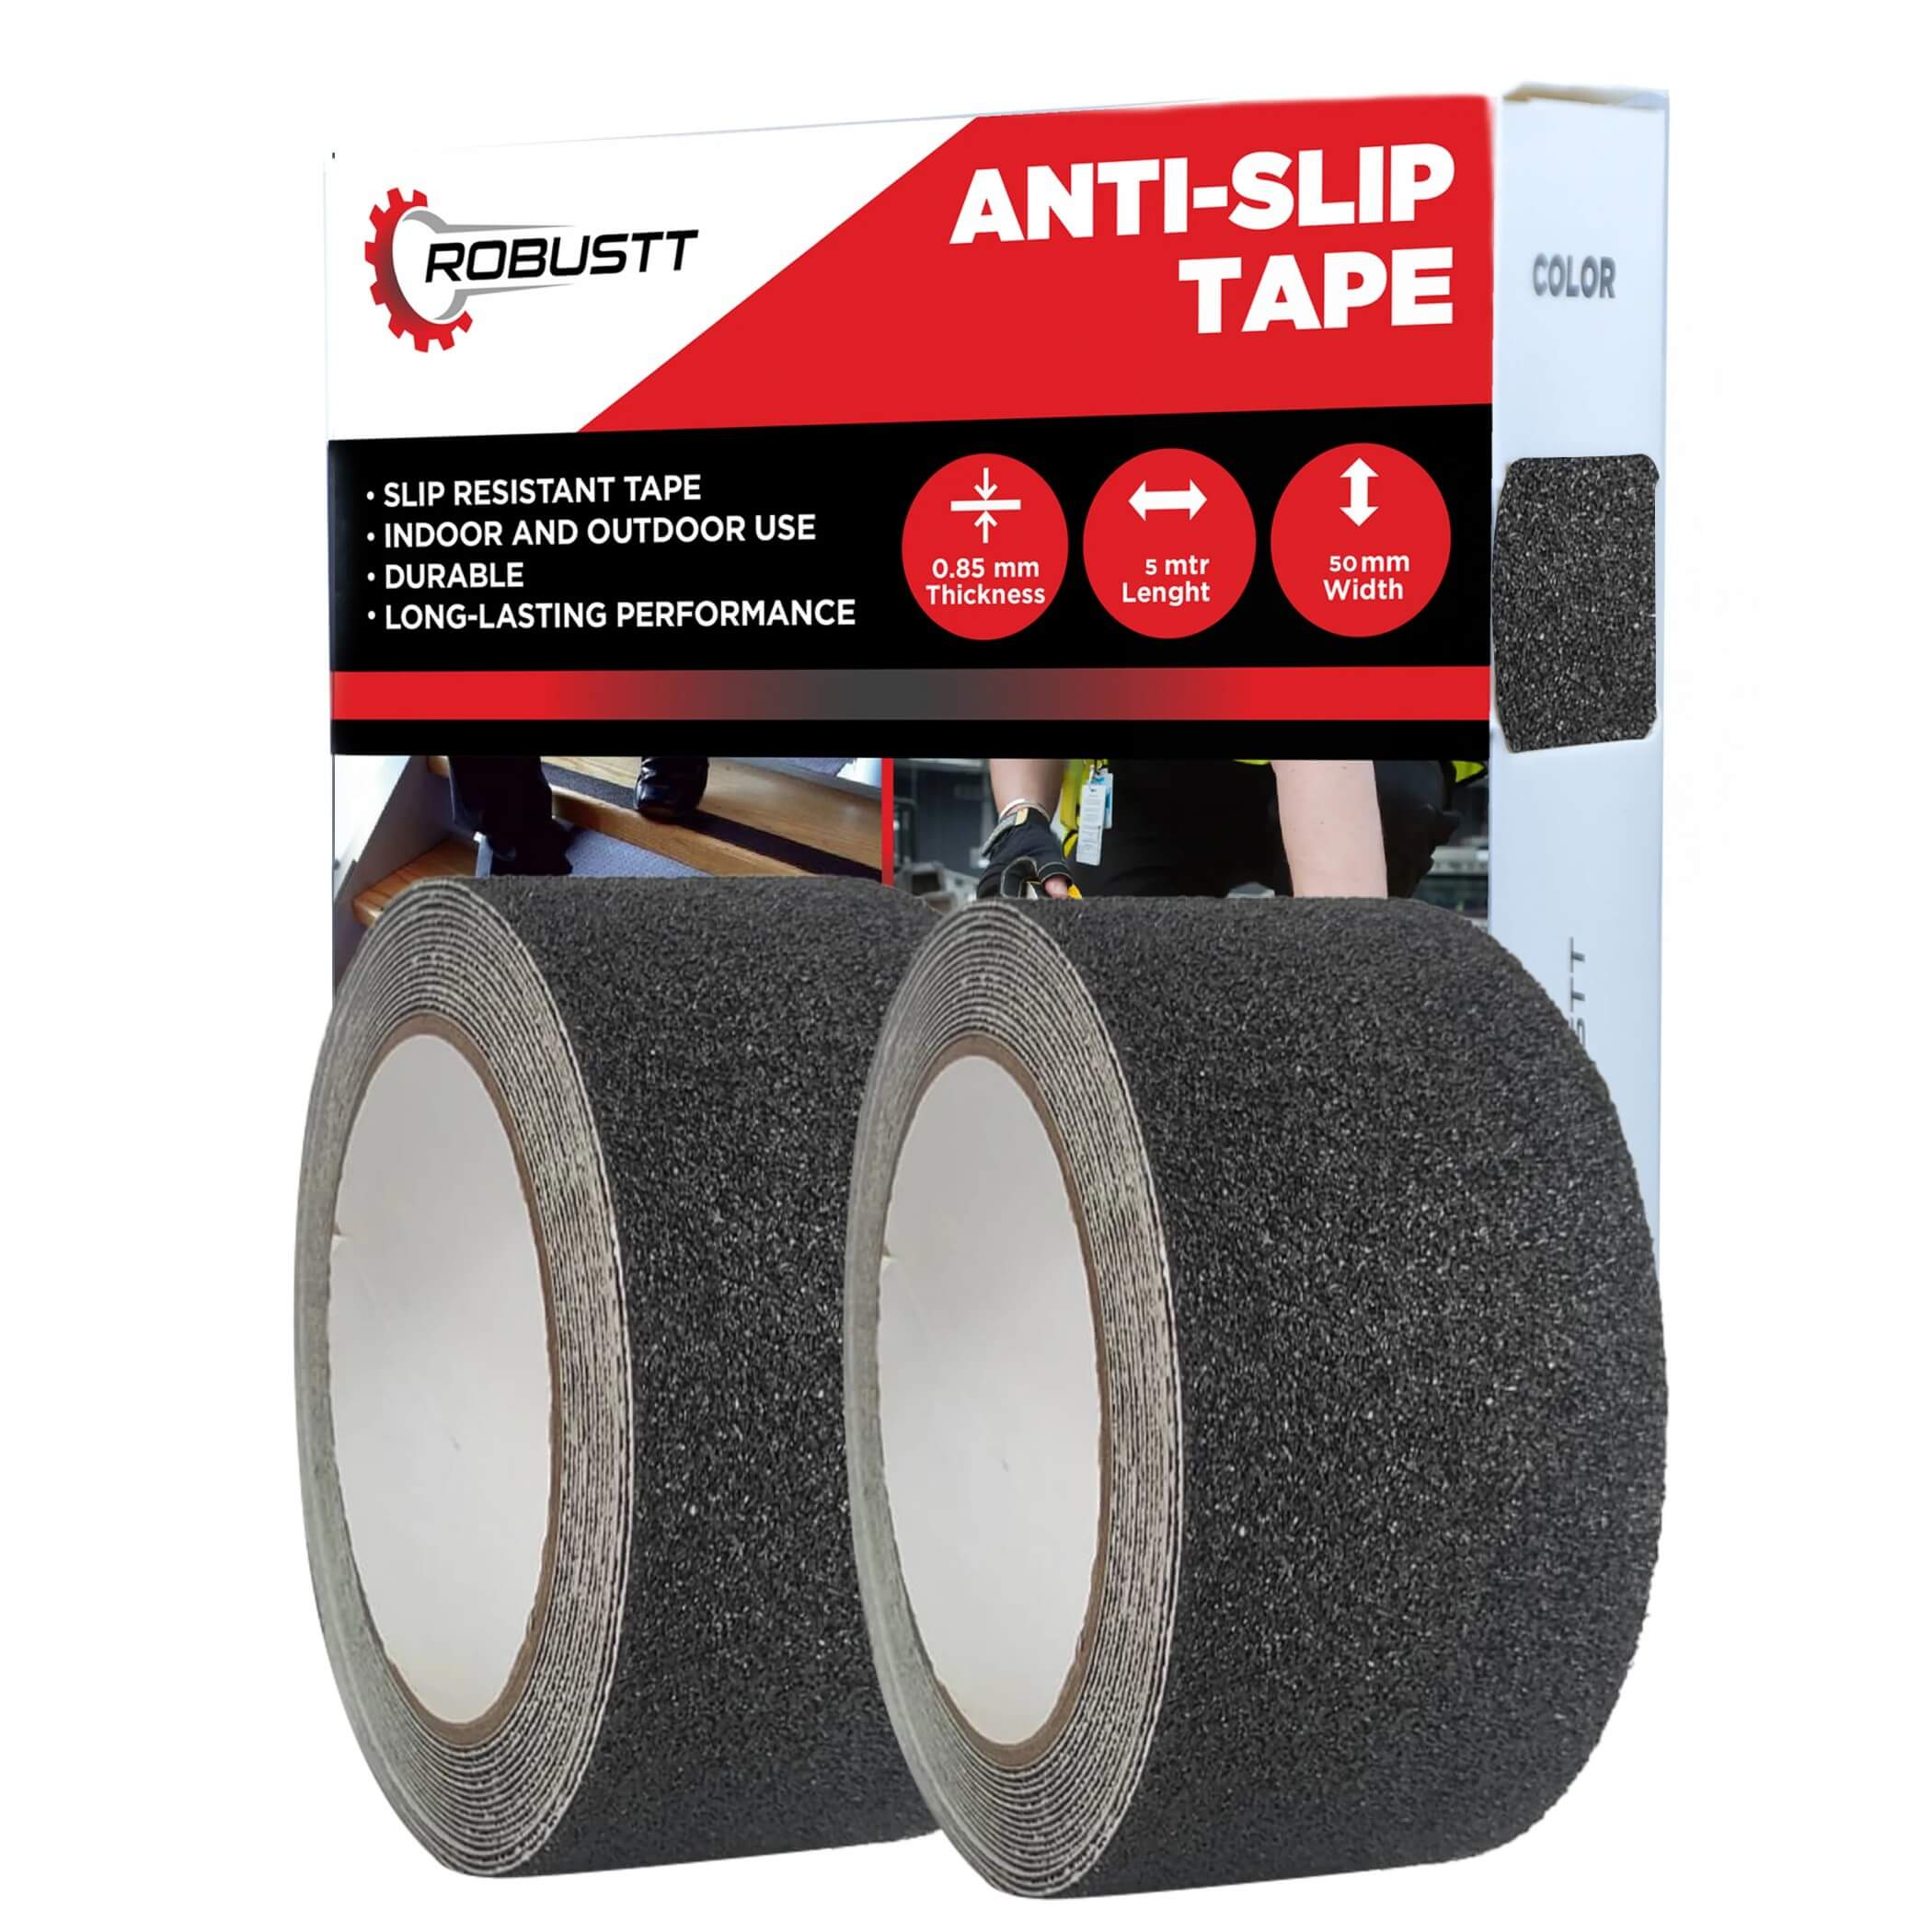 robustt-anti-skid-antislip-10mtr-guaranteed-x50mm-black-fall-resistant-with-pet-material-and-solvent-acrylic-adhesive-tape-pack-of-2